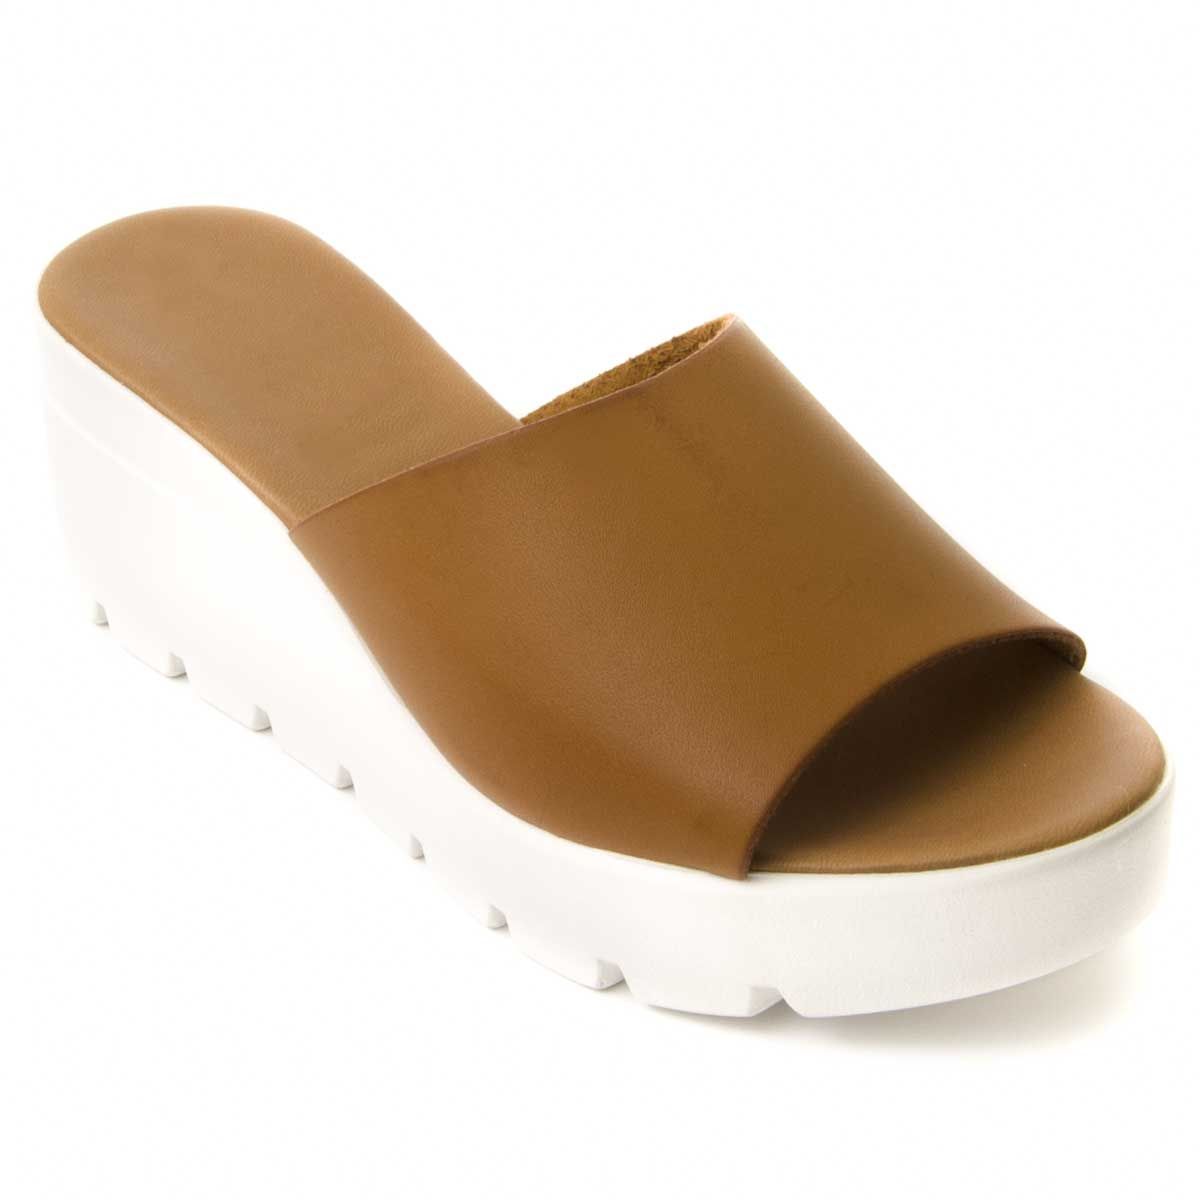 Super Sandals with wedge and platform. This sandals are manufactured in light materials and very comfortable. Comfortable and very flexible hormo, perfectly adjustable at the foot. Its inner plant is comfortable and padded. Polyurethane floor. The polyurethane material is not split, does not wear, it is non-slip and makes it the lighter footwear. Without a doubt, it is the perfect sandal for your day or weekend. Capsula by Patrizia collection. Measures: wedge 7cm and 3cm platform approximately.